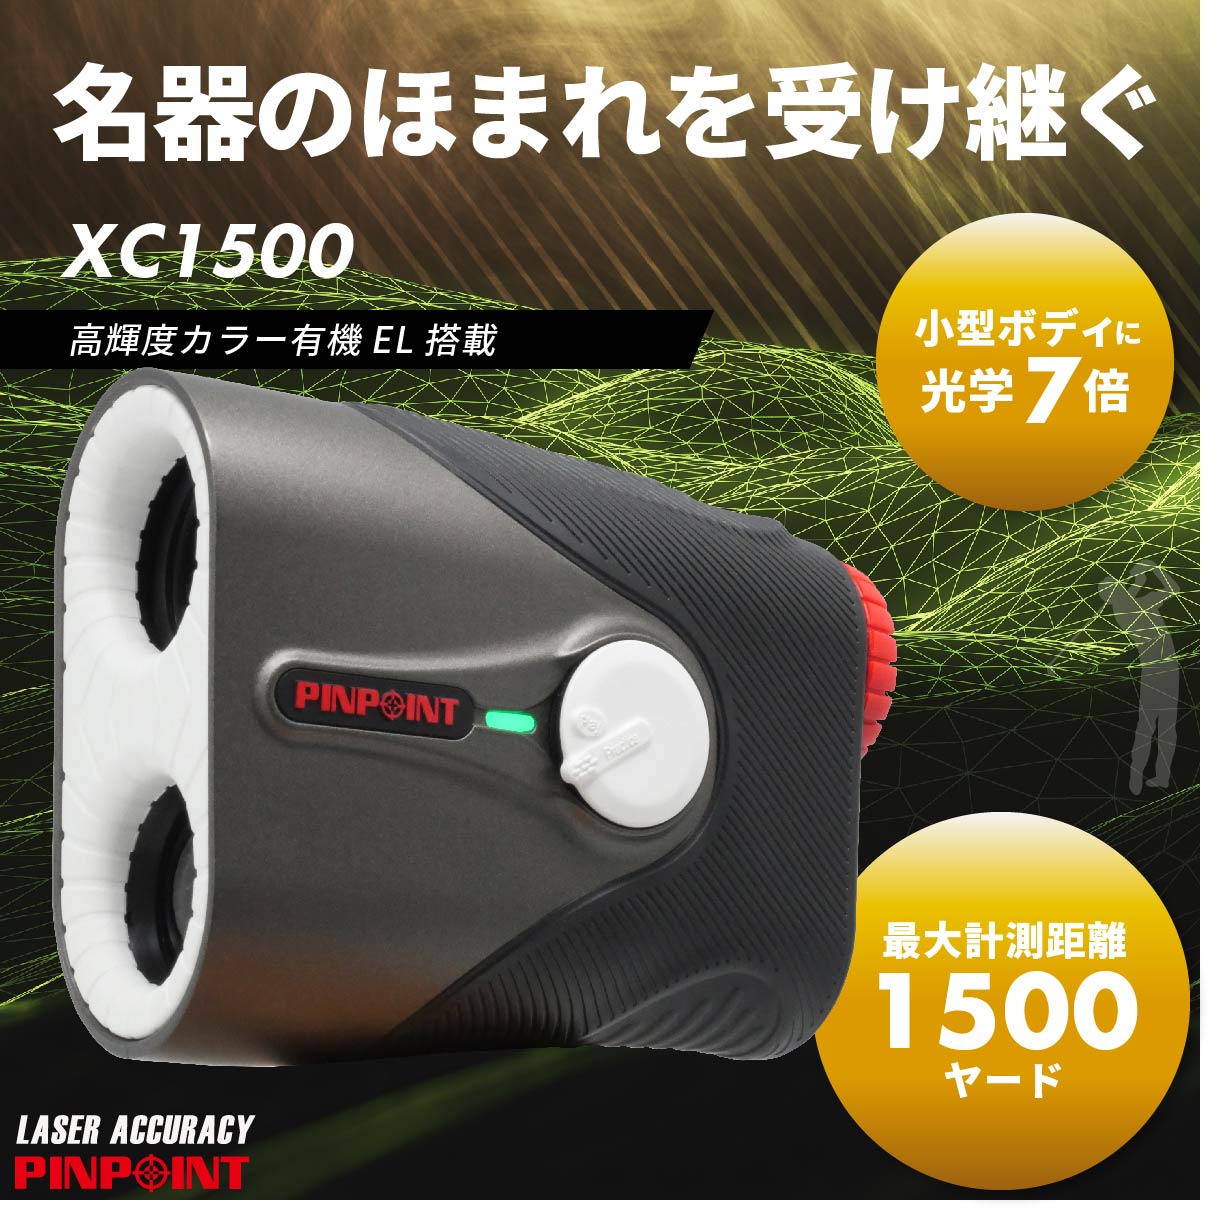 PINPOINT XC1500